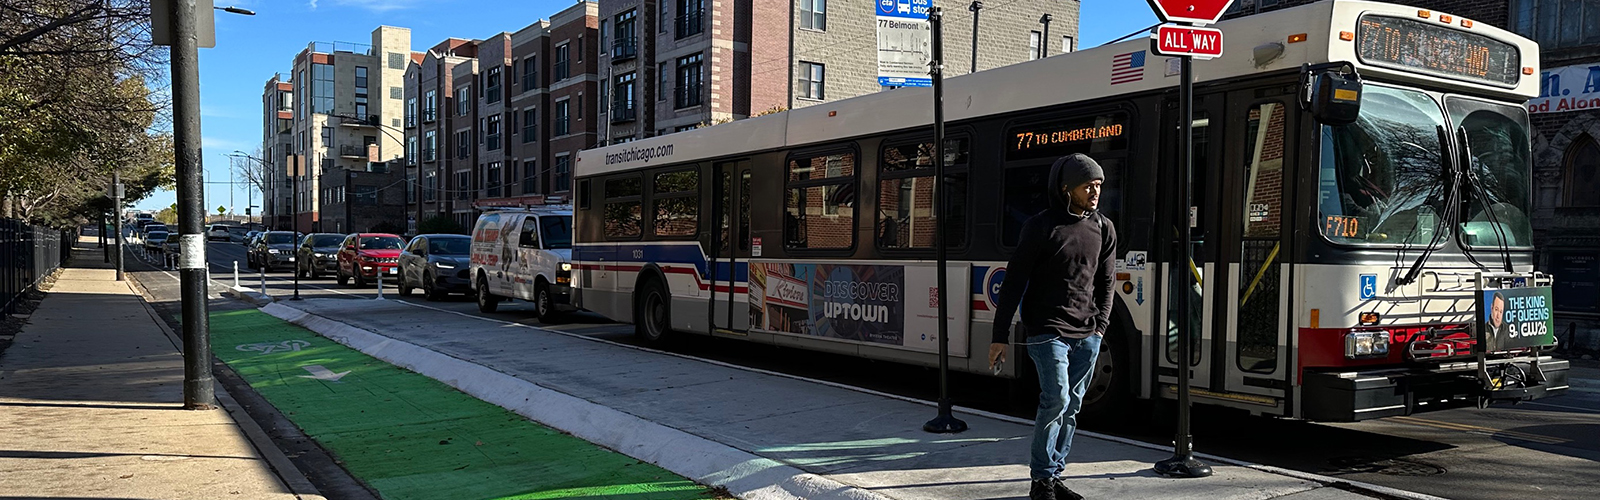 View of street with curbside green-painted bike lane separated from vehicle travel lane by concrete bus island. Person standing on concrete median about to board CTA bus.